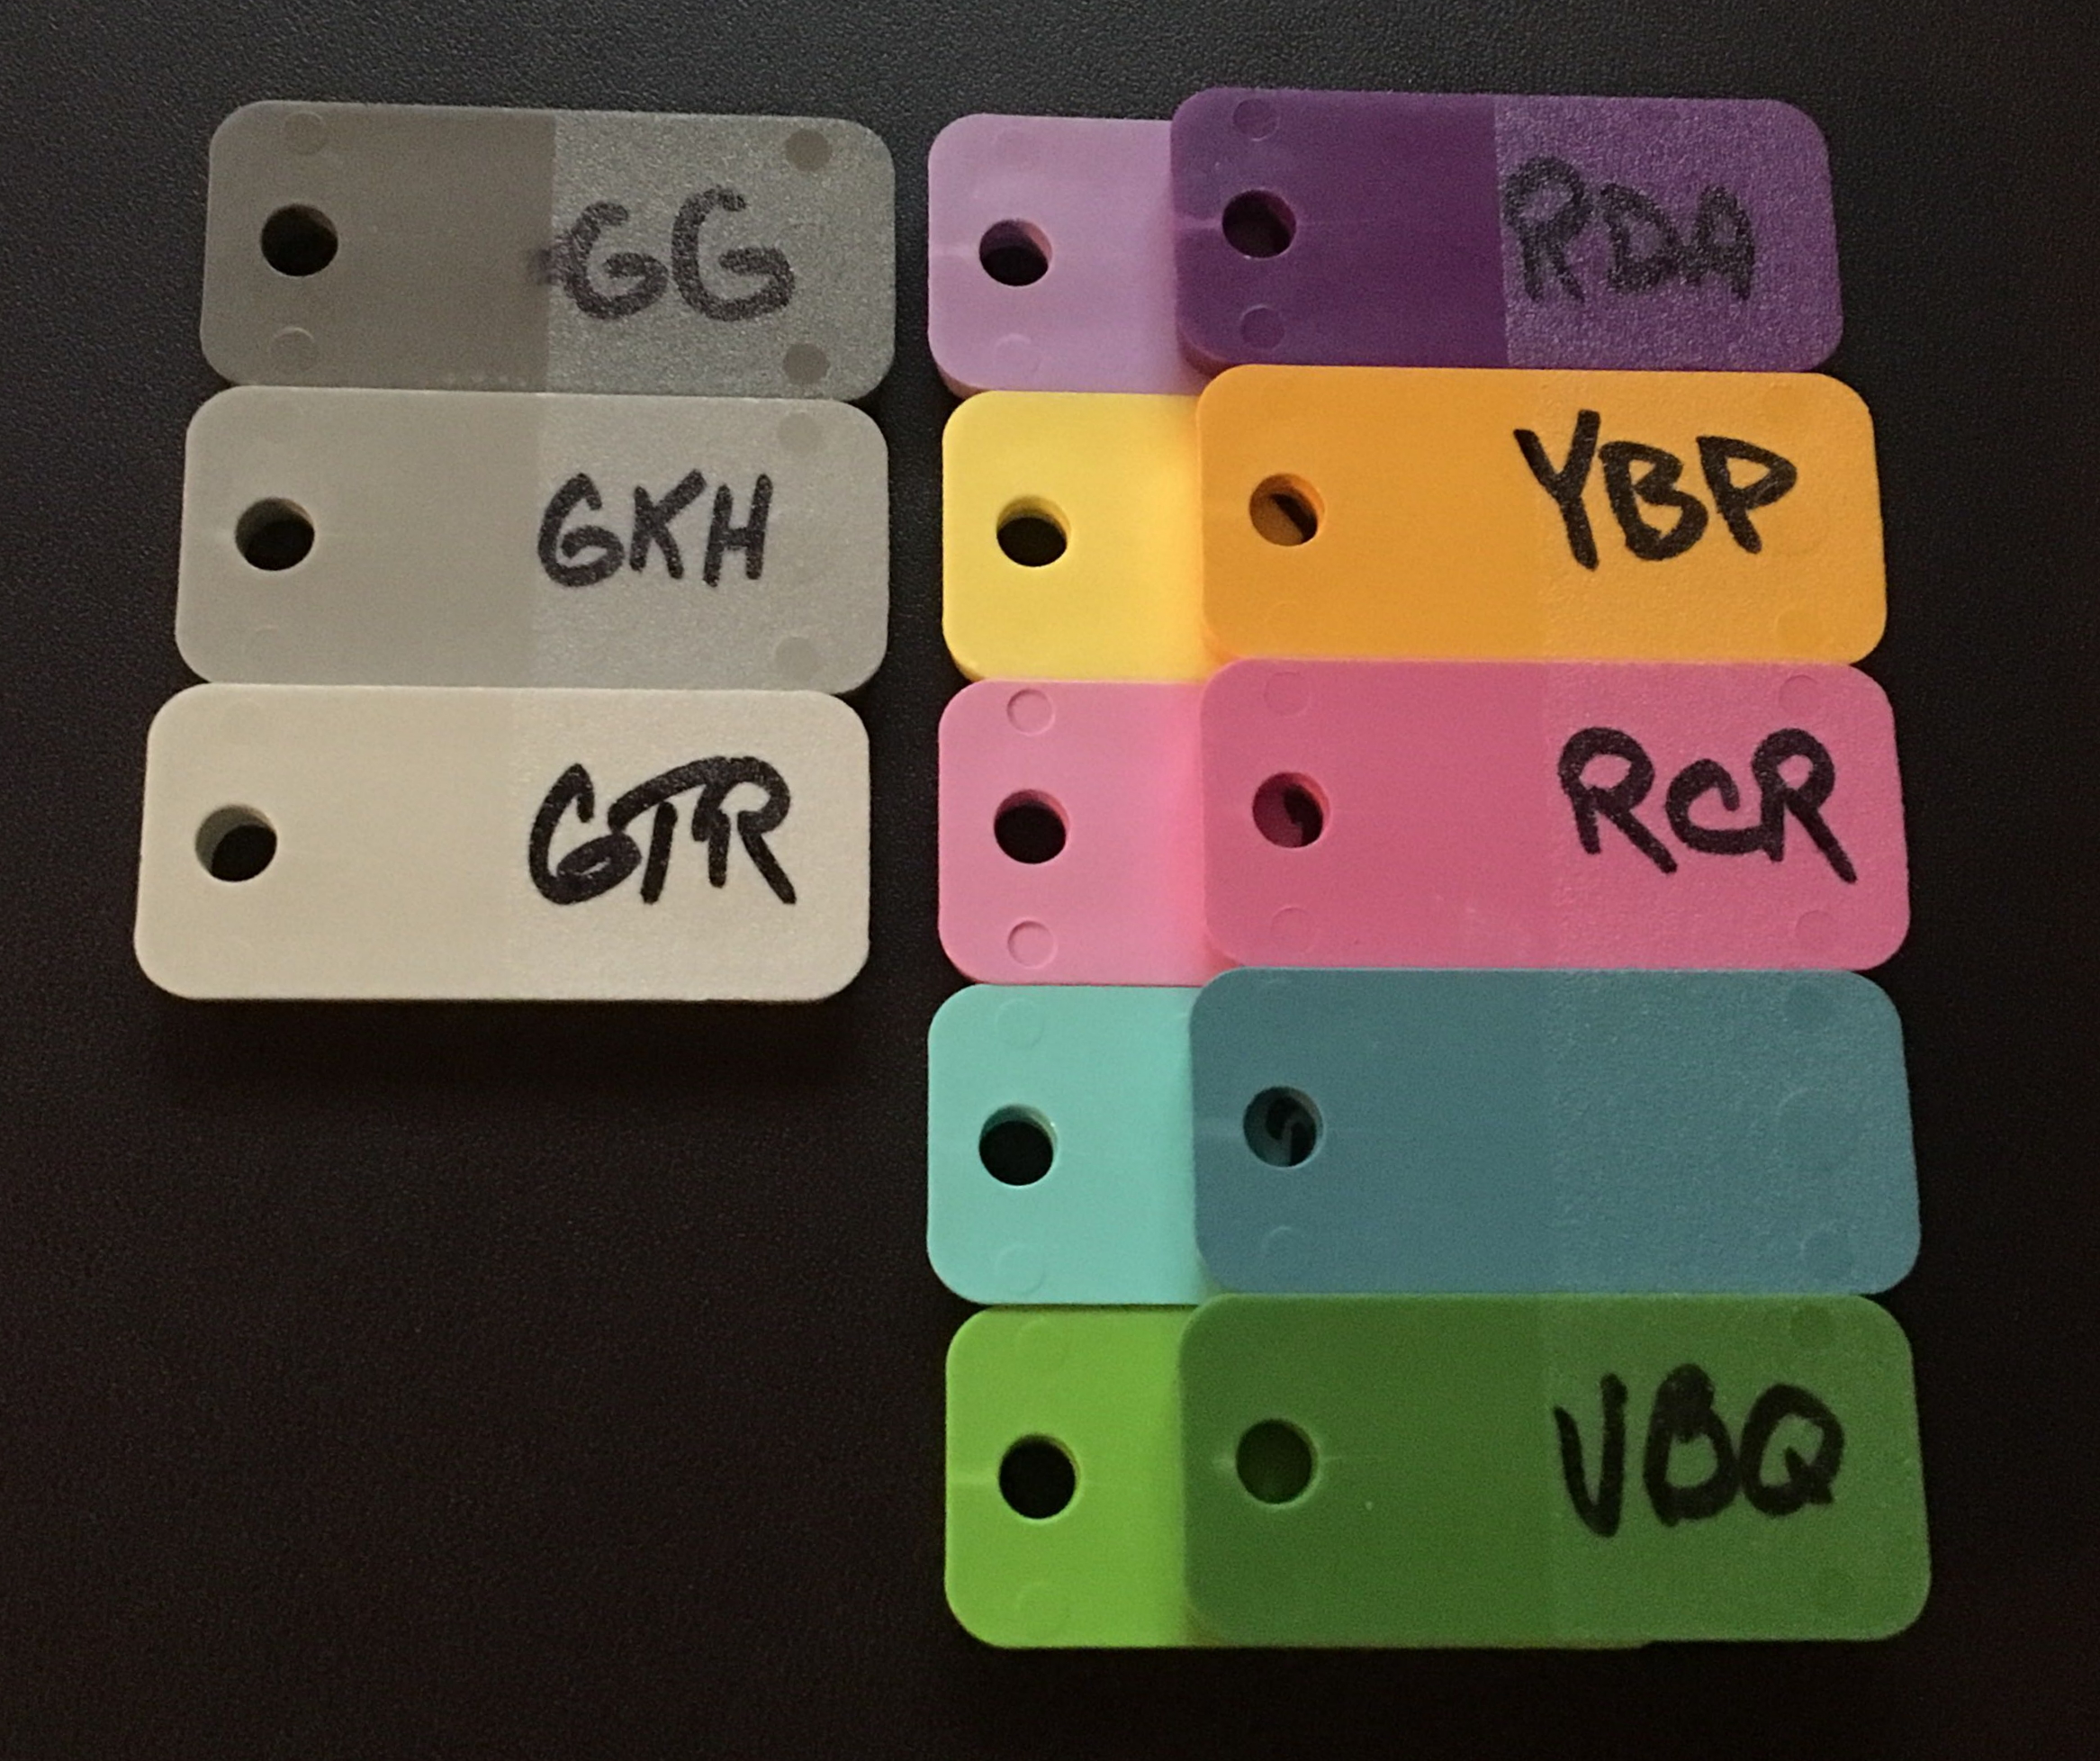 Signature Plastics ABS color chips used by GMK to color match the keycaps